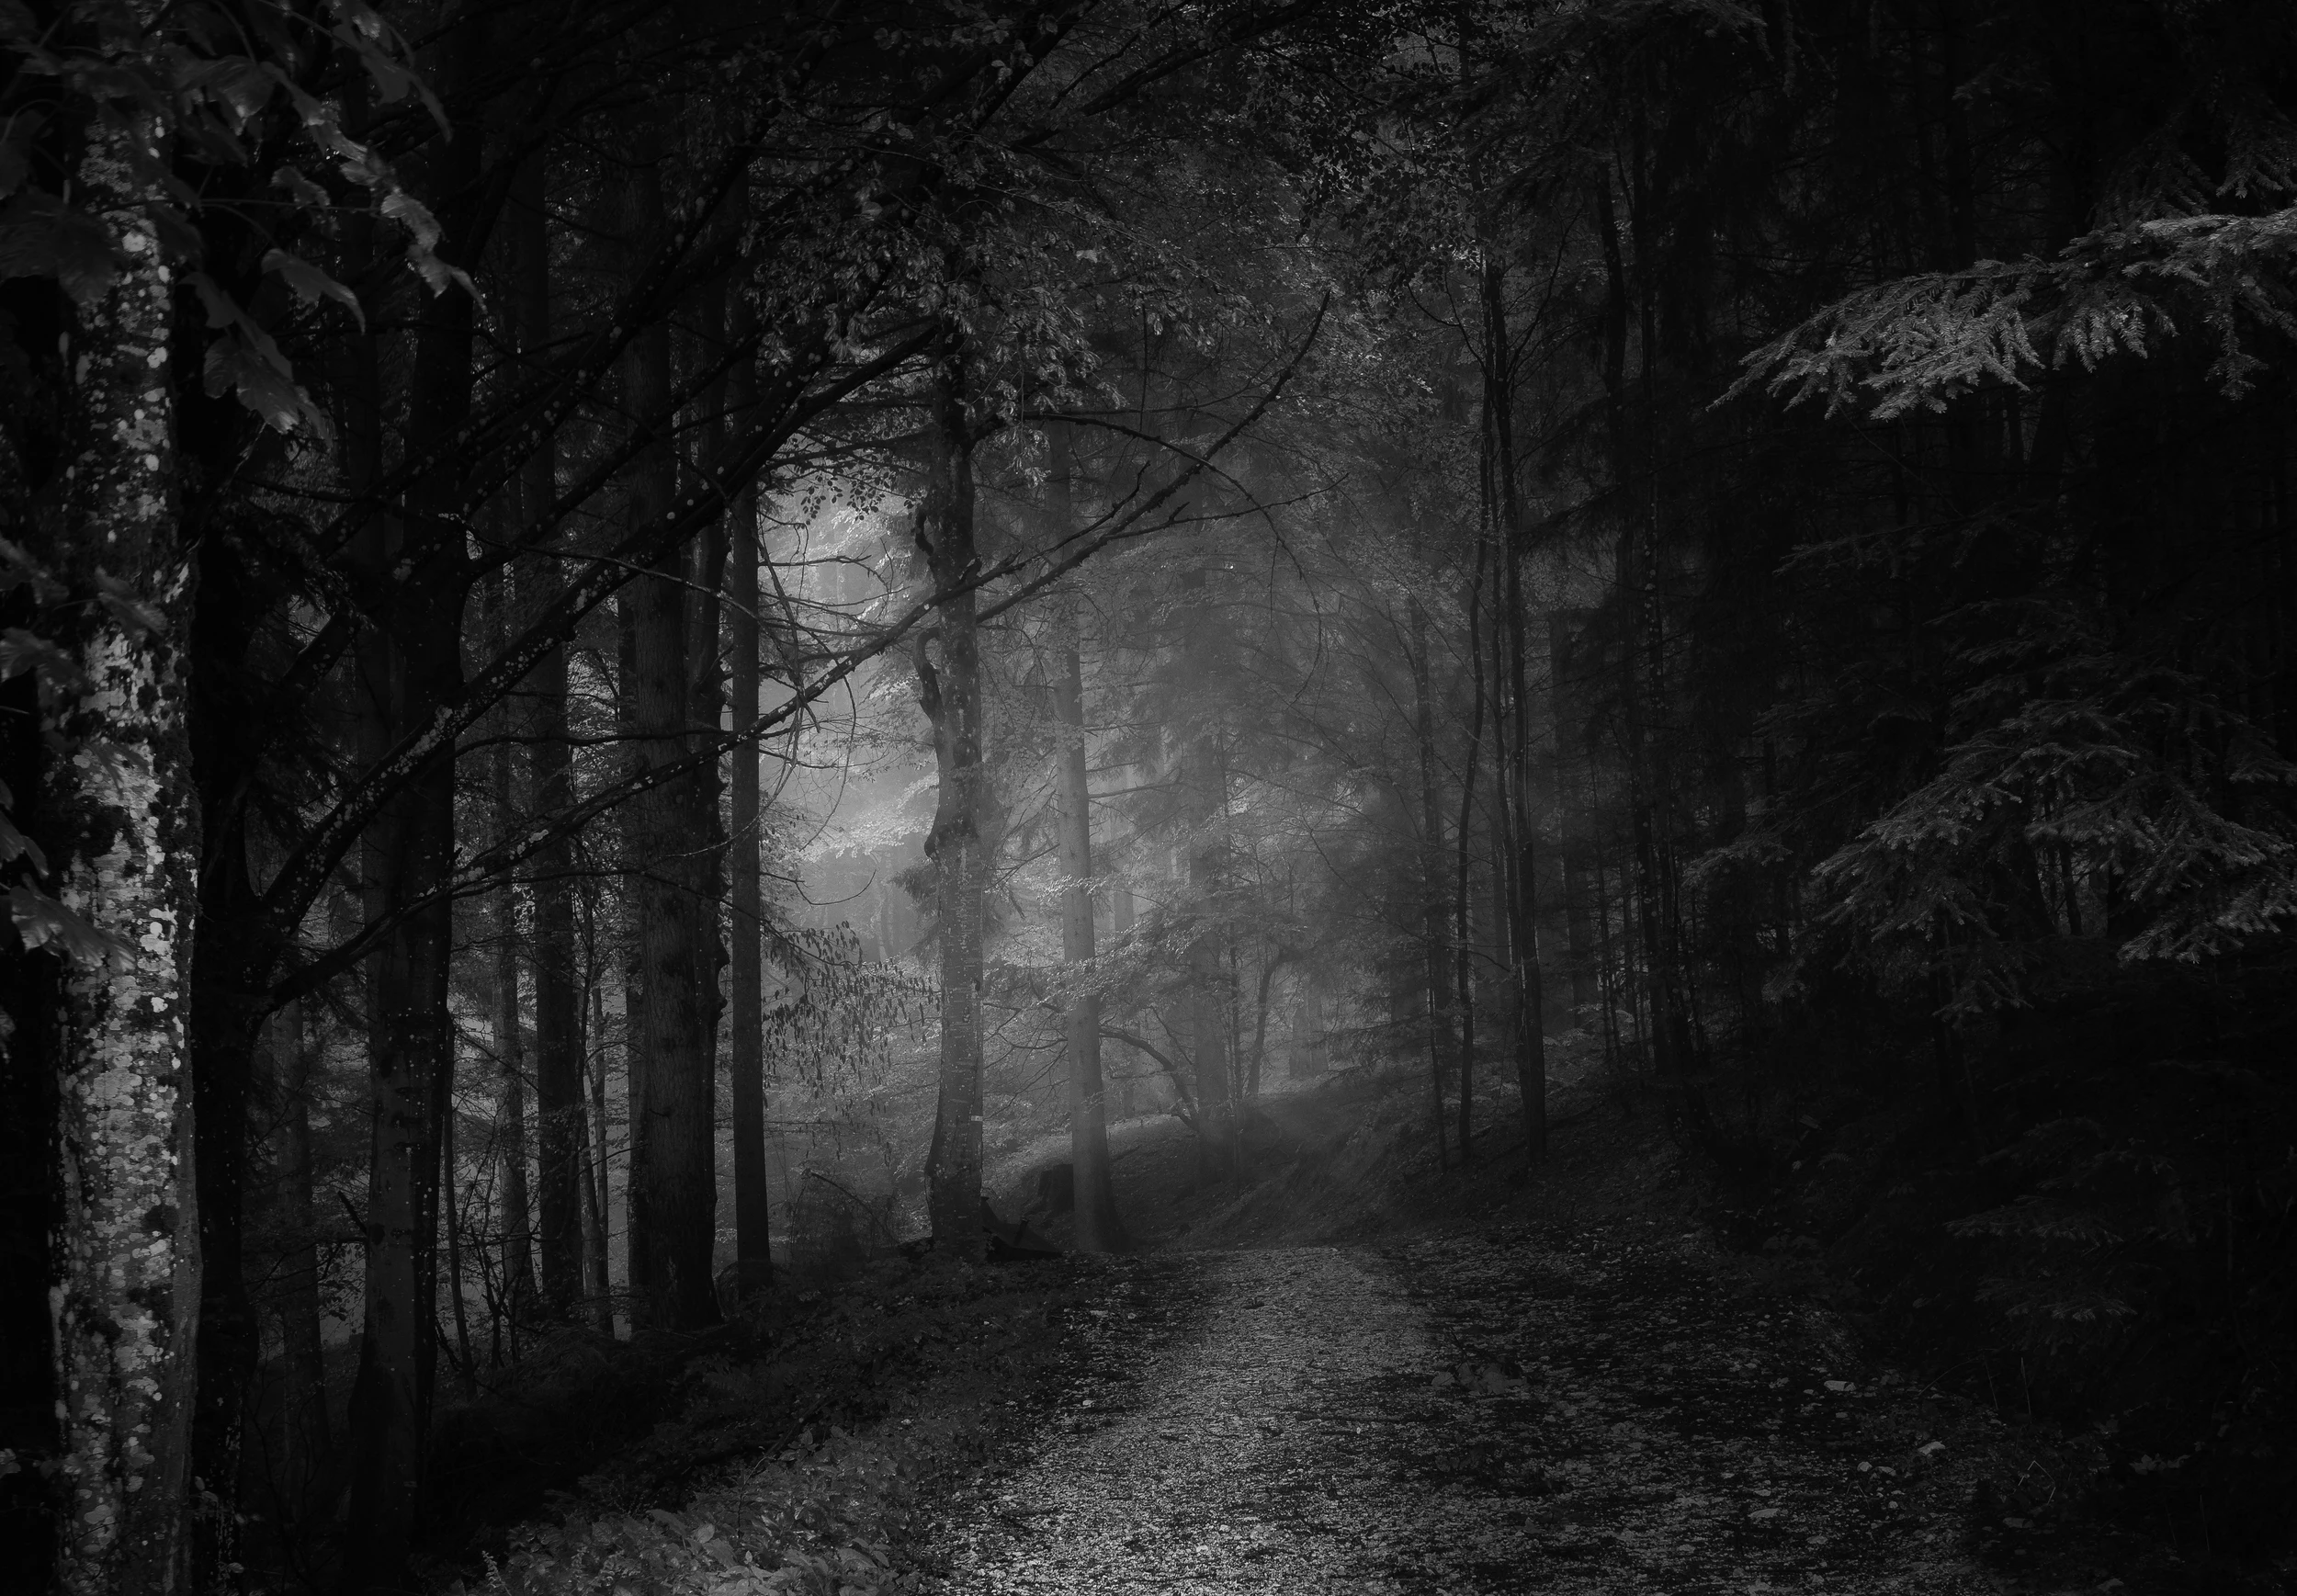 "Lets run directly into the dark forest!" Photo by Simon Berger on Unsplash